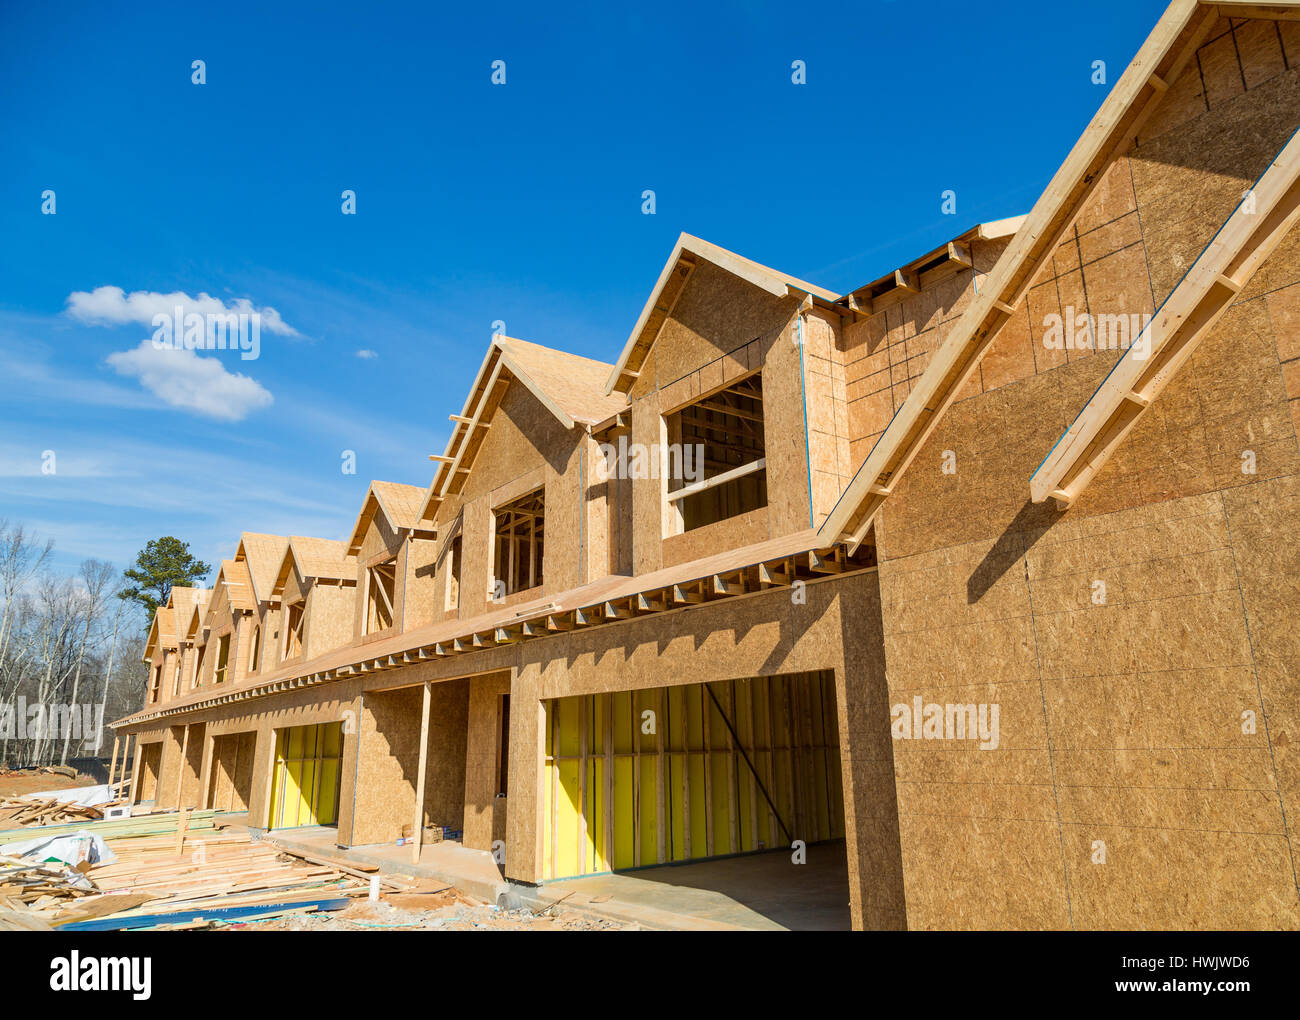 New townhouse construction of pine lumber and sheathing Stock Photo